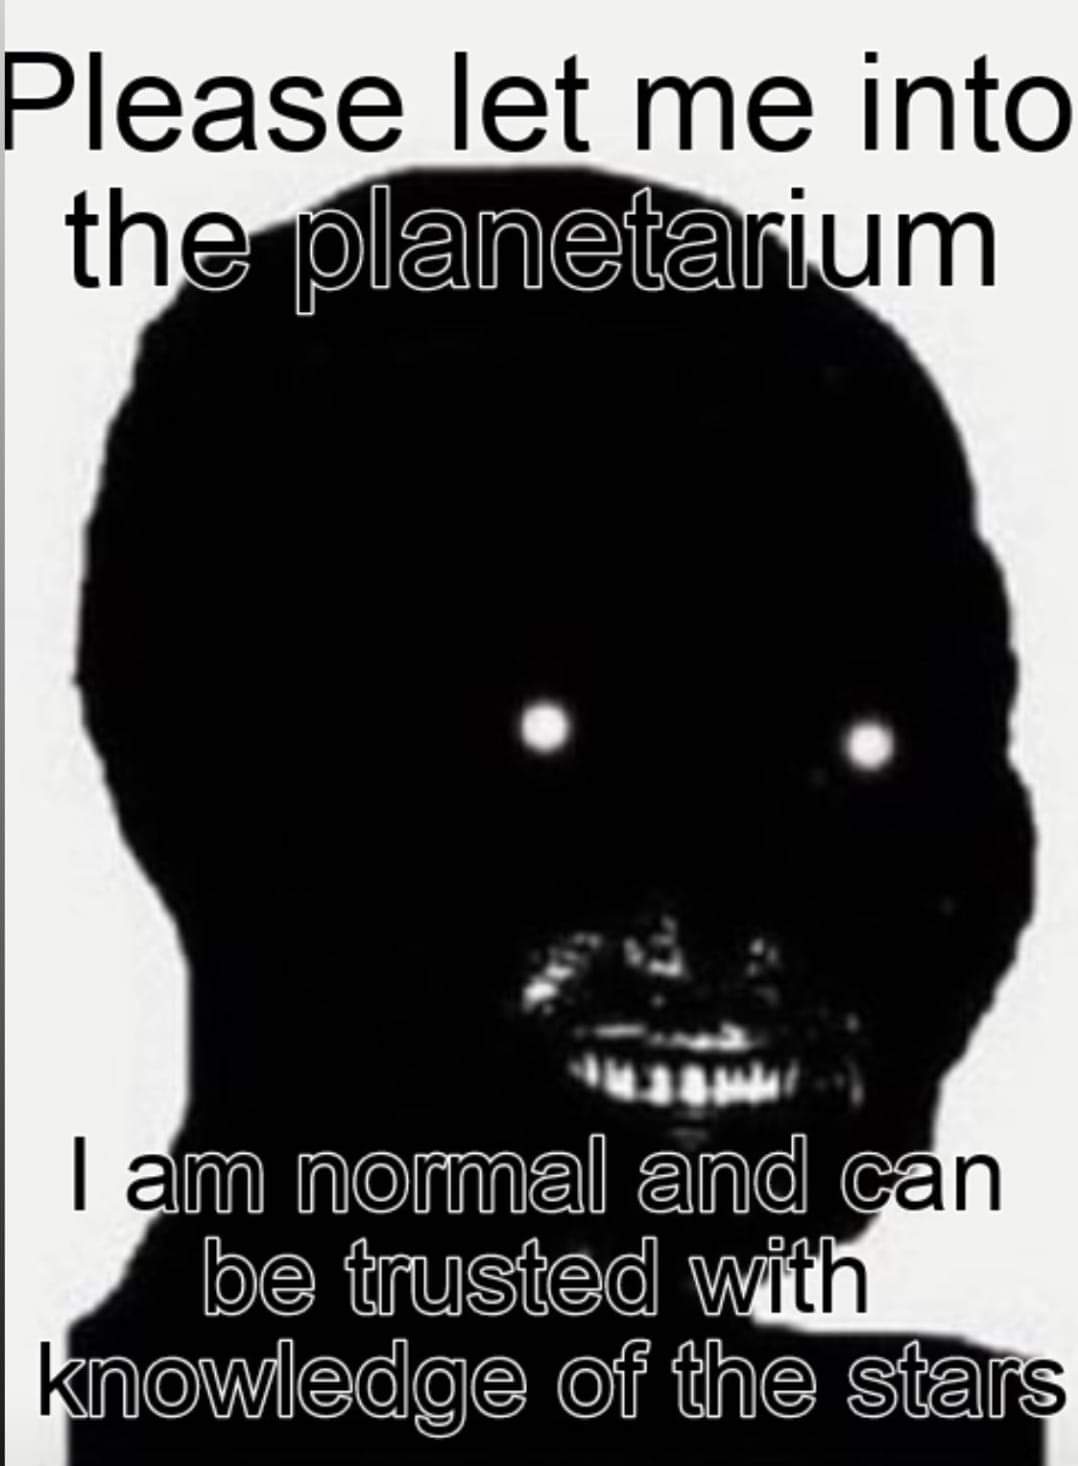 dank memes and funny pics - head - Please let me into the planetarium I am normal and can be trusted with knowledge of the stars